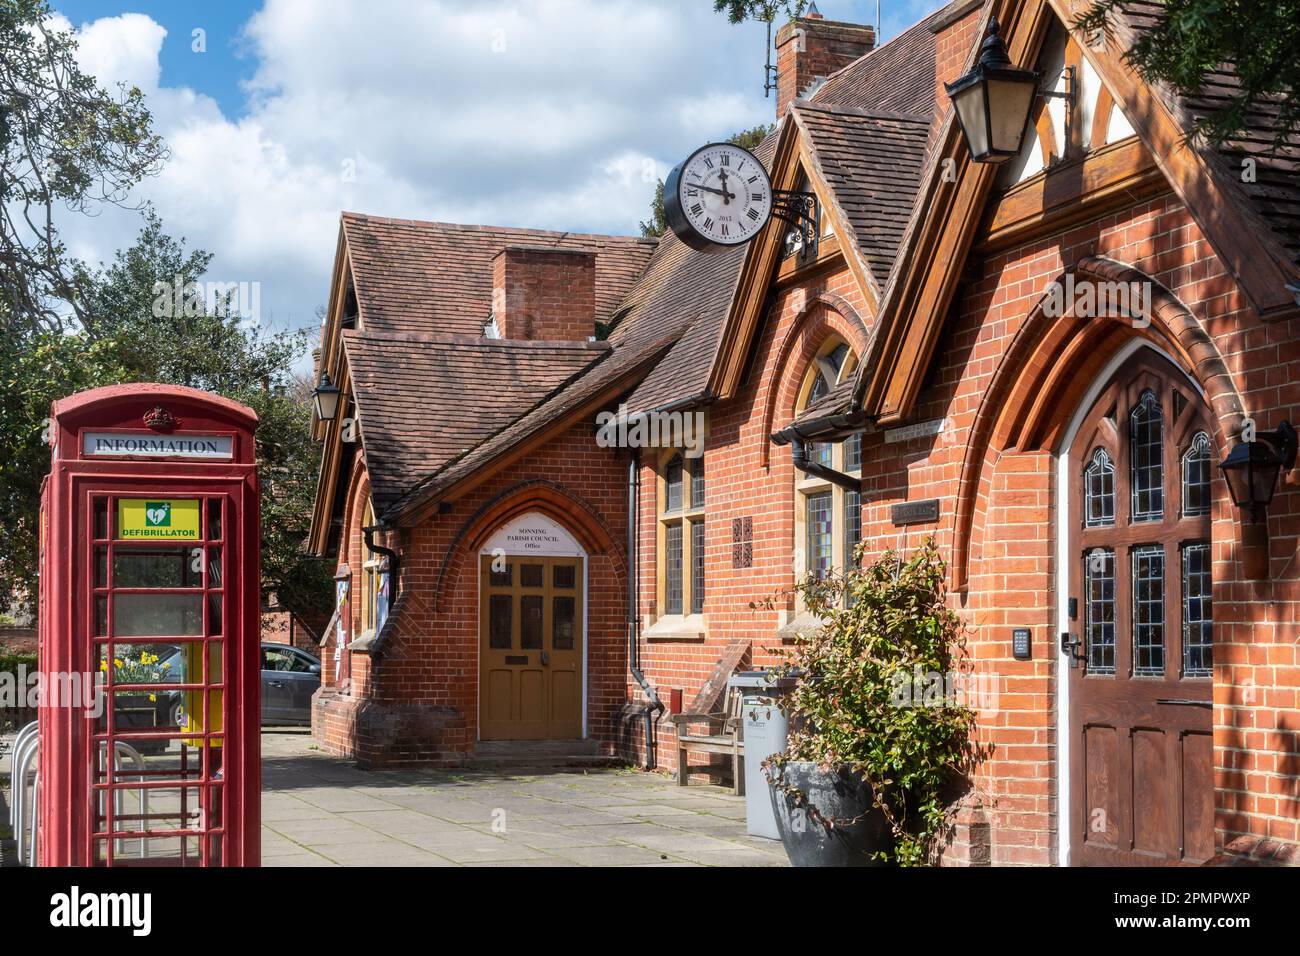 Pearson Hall, also housing the parish council office and Sonning Club, in the village of Sonning-on-Thames, Berkshire, England, UK, with red phone box Stock Photo